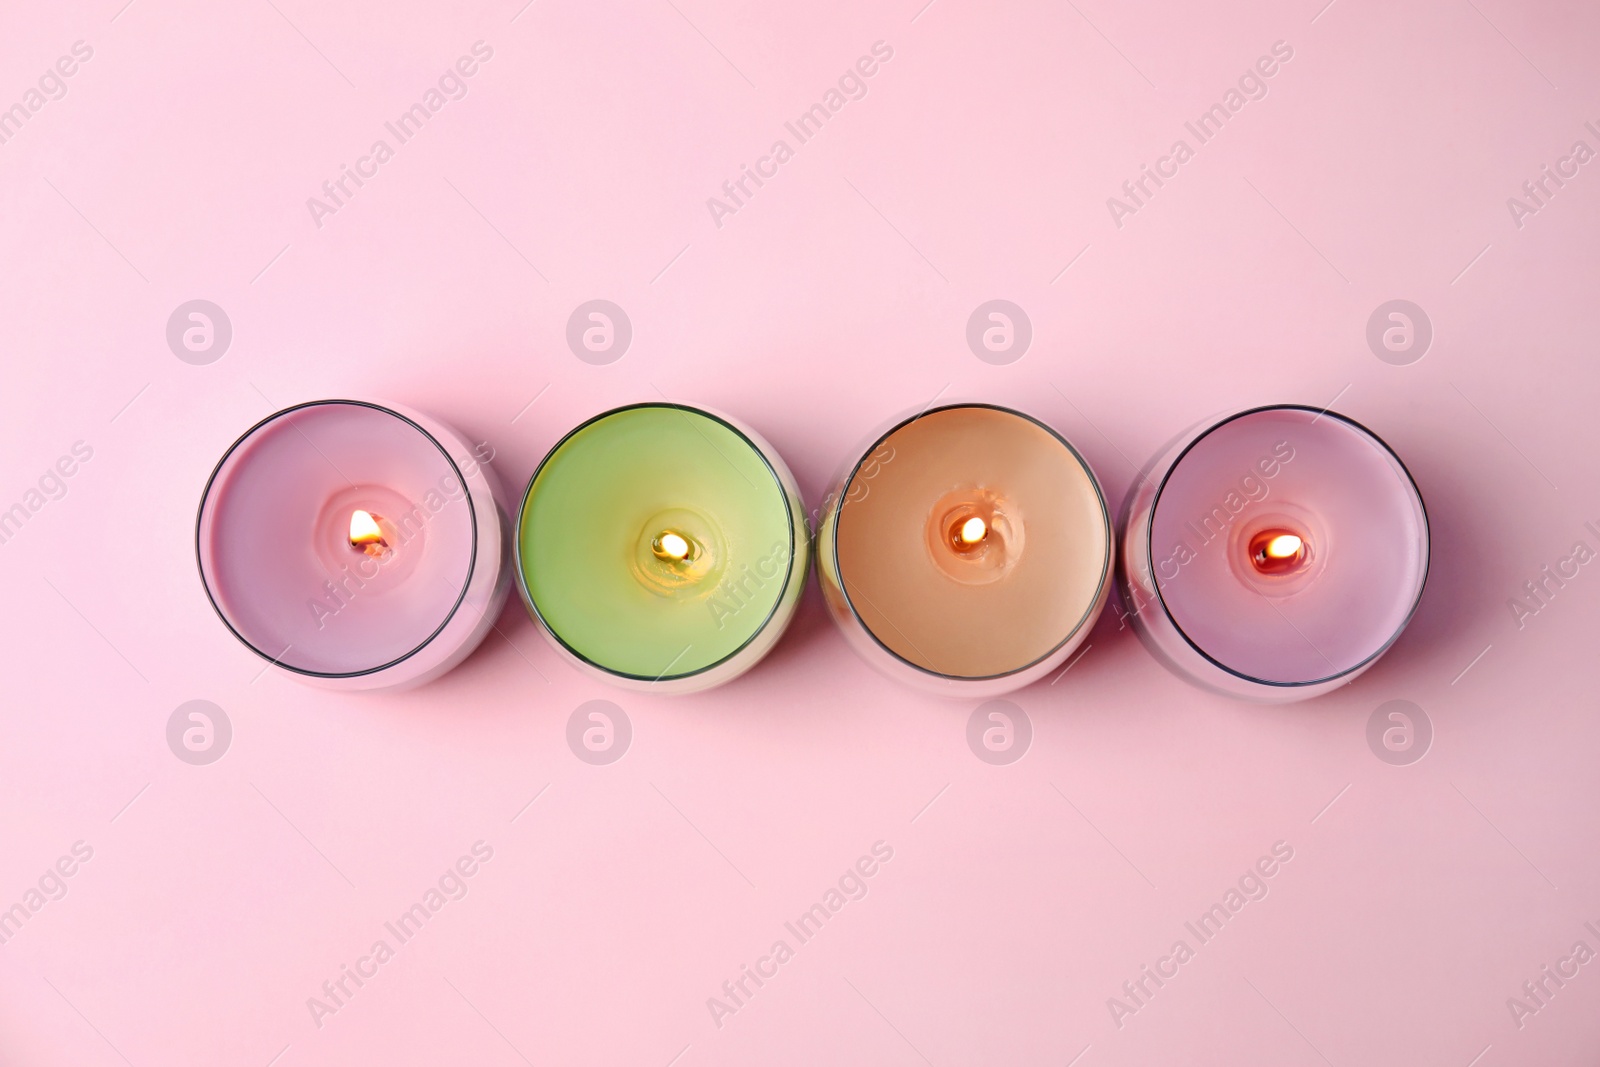 Photo of Burning wax candles in glass holders on pink background, flat lay